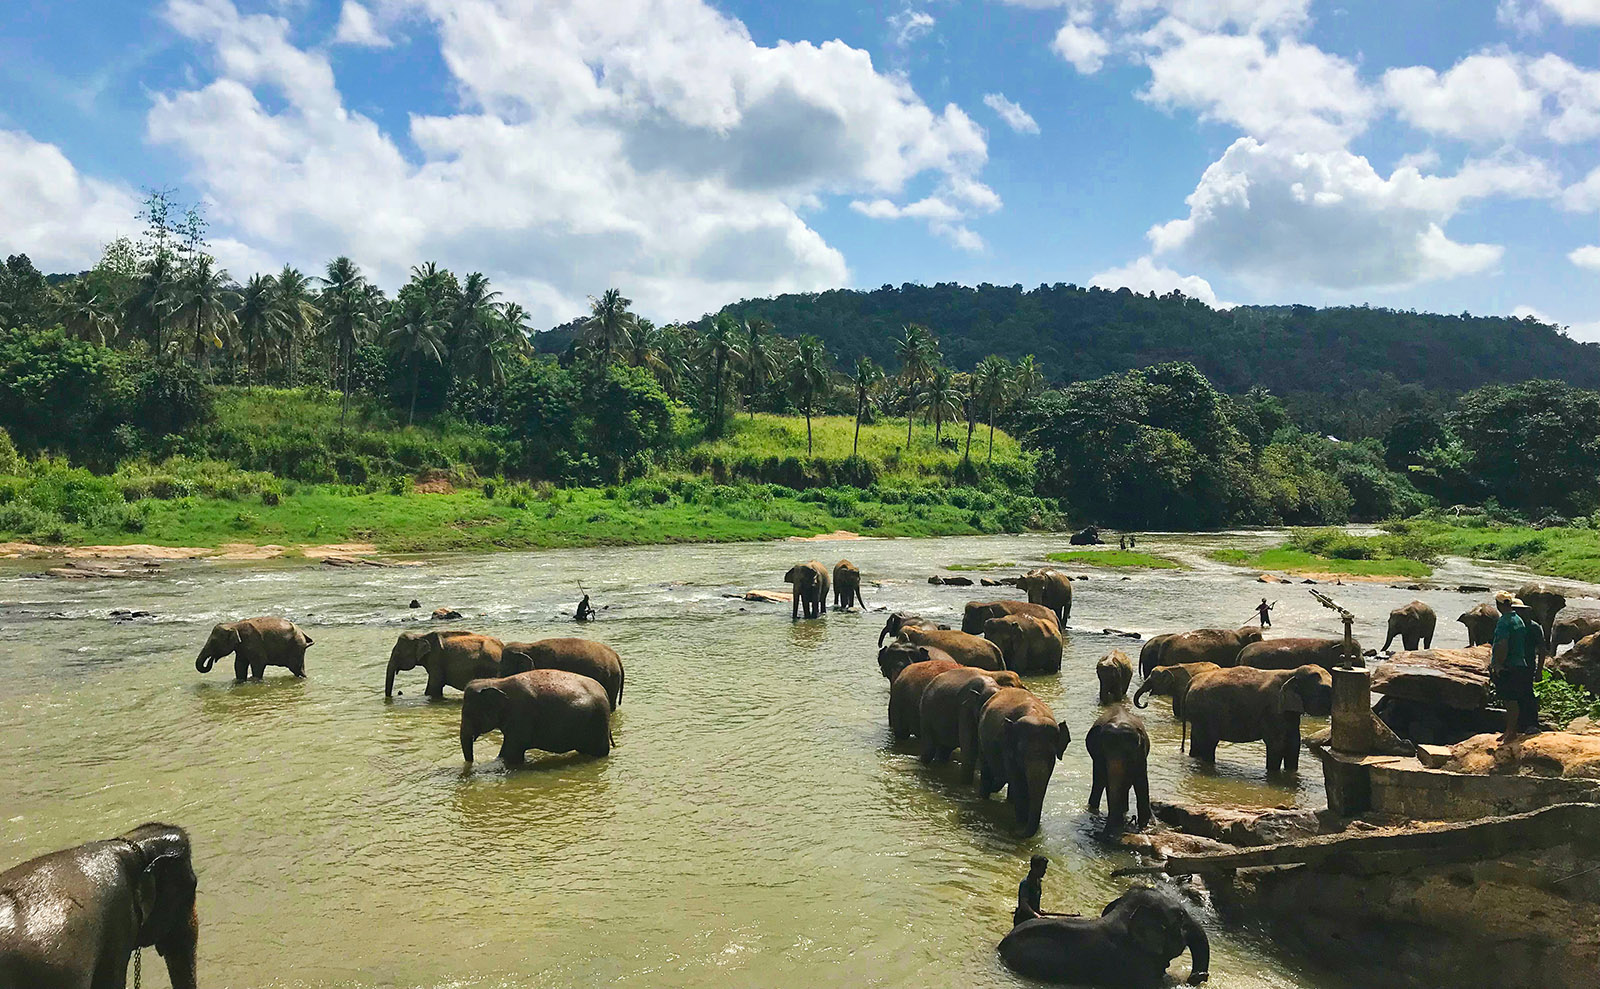 a large group of elephants bathing in a body of water surrounded by green grass